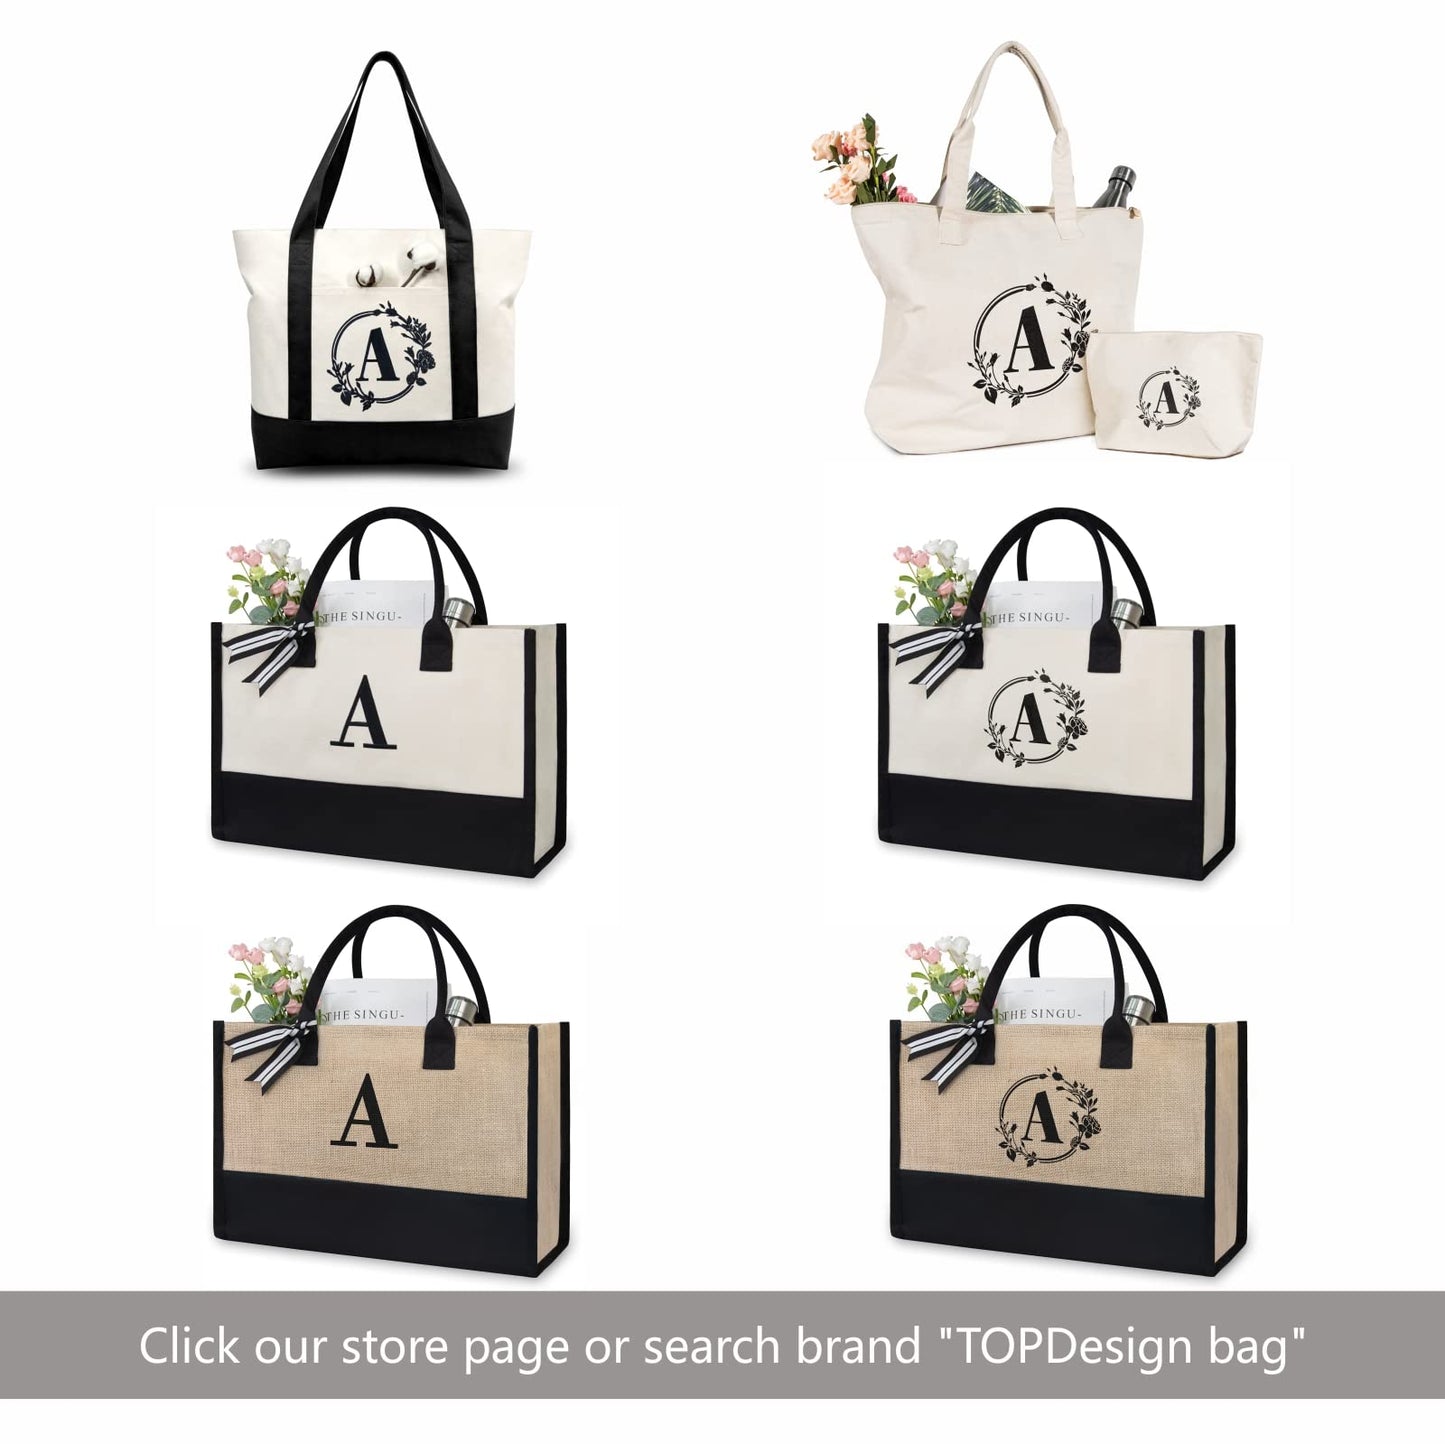 TOPDesign Initial Jute/Canvas Tote Bag, Personalized Present Bag, Suitable for Wedding, Birthday, Beach, Holiday, is a Great Gift for Women, Mom, Teachers, Friends, Bridesmaids (Letter S)